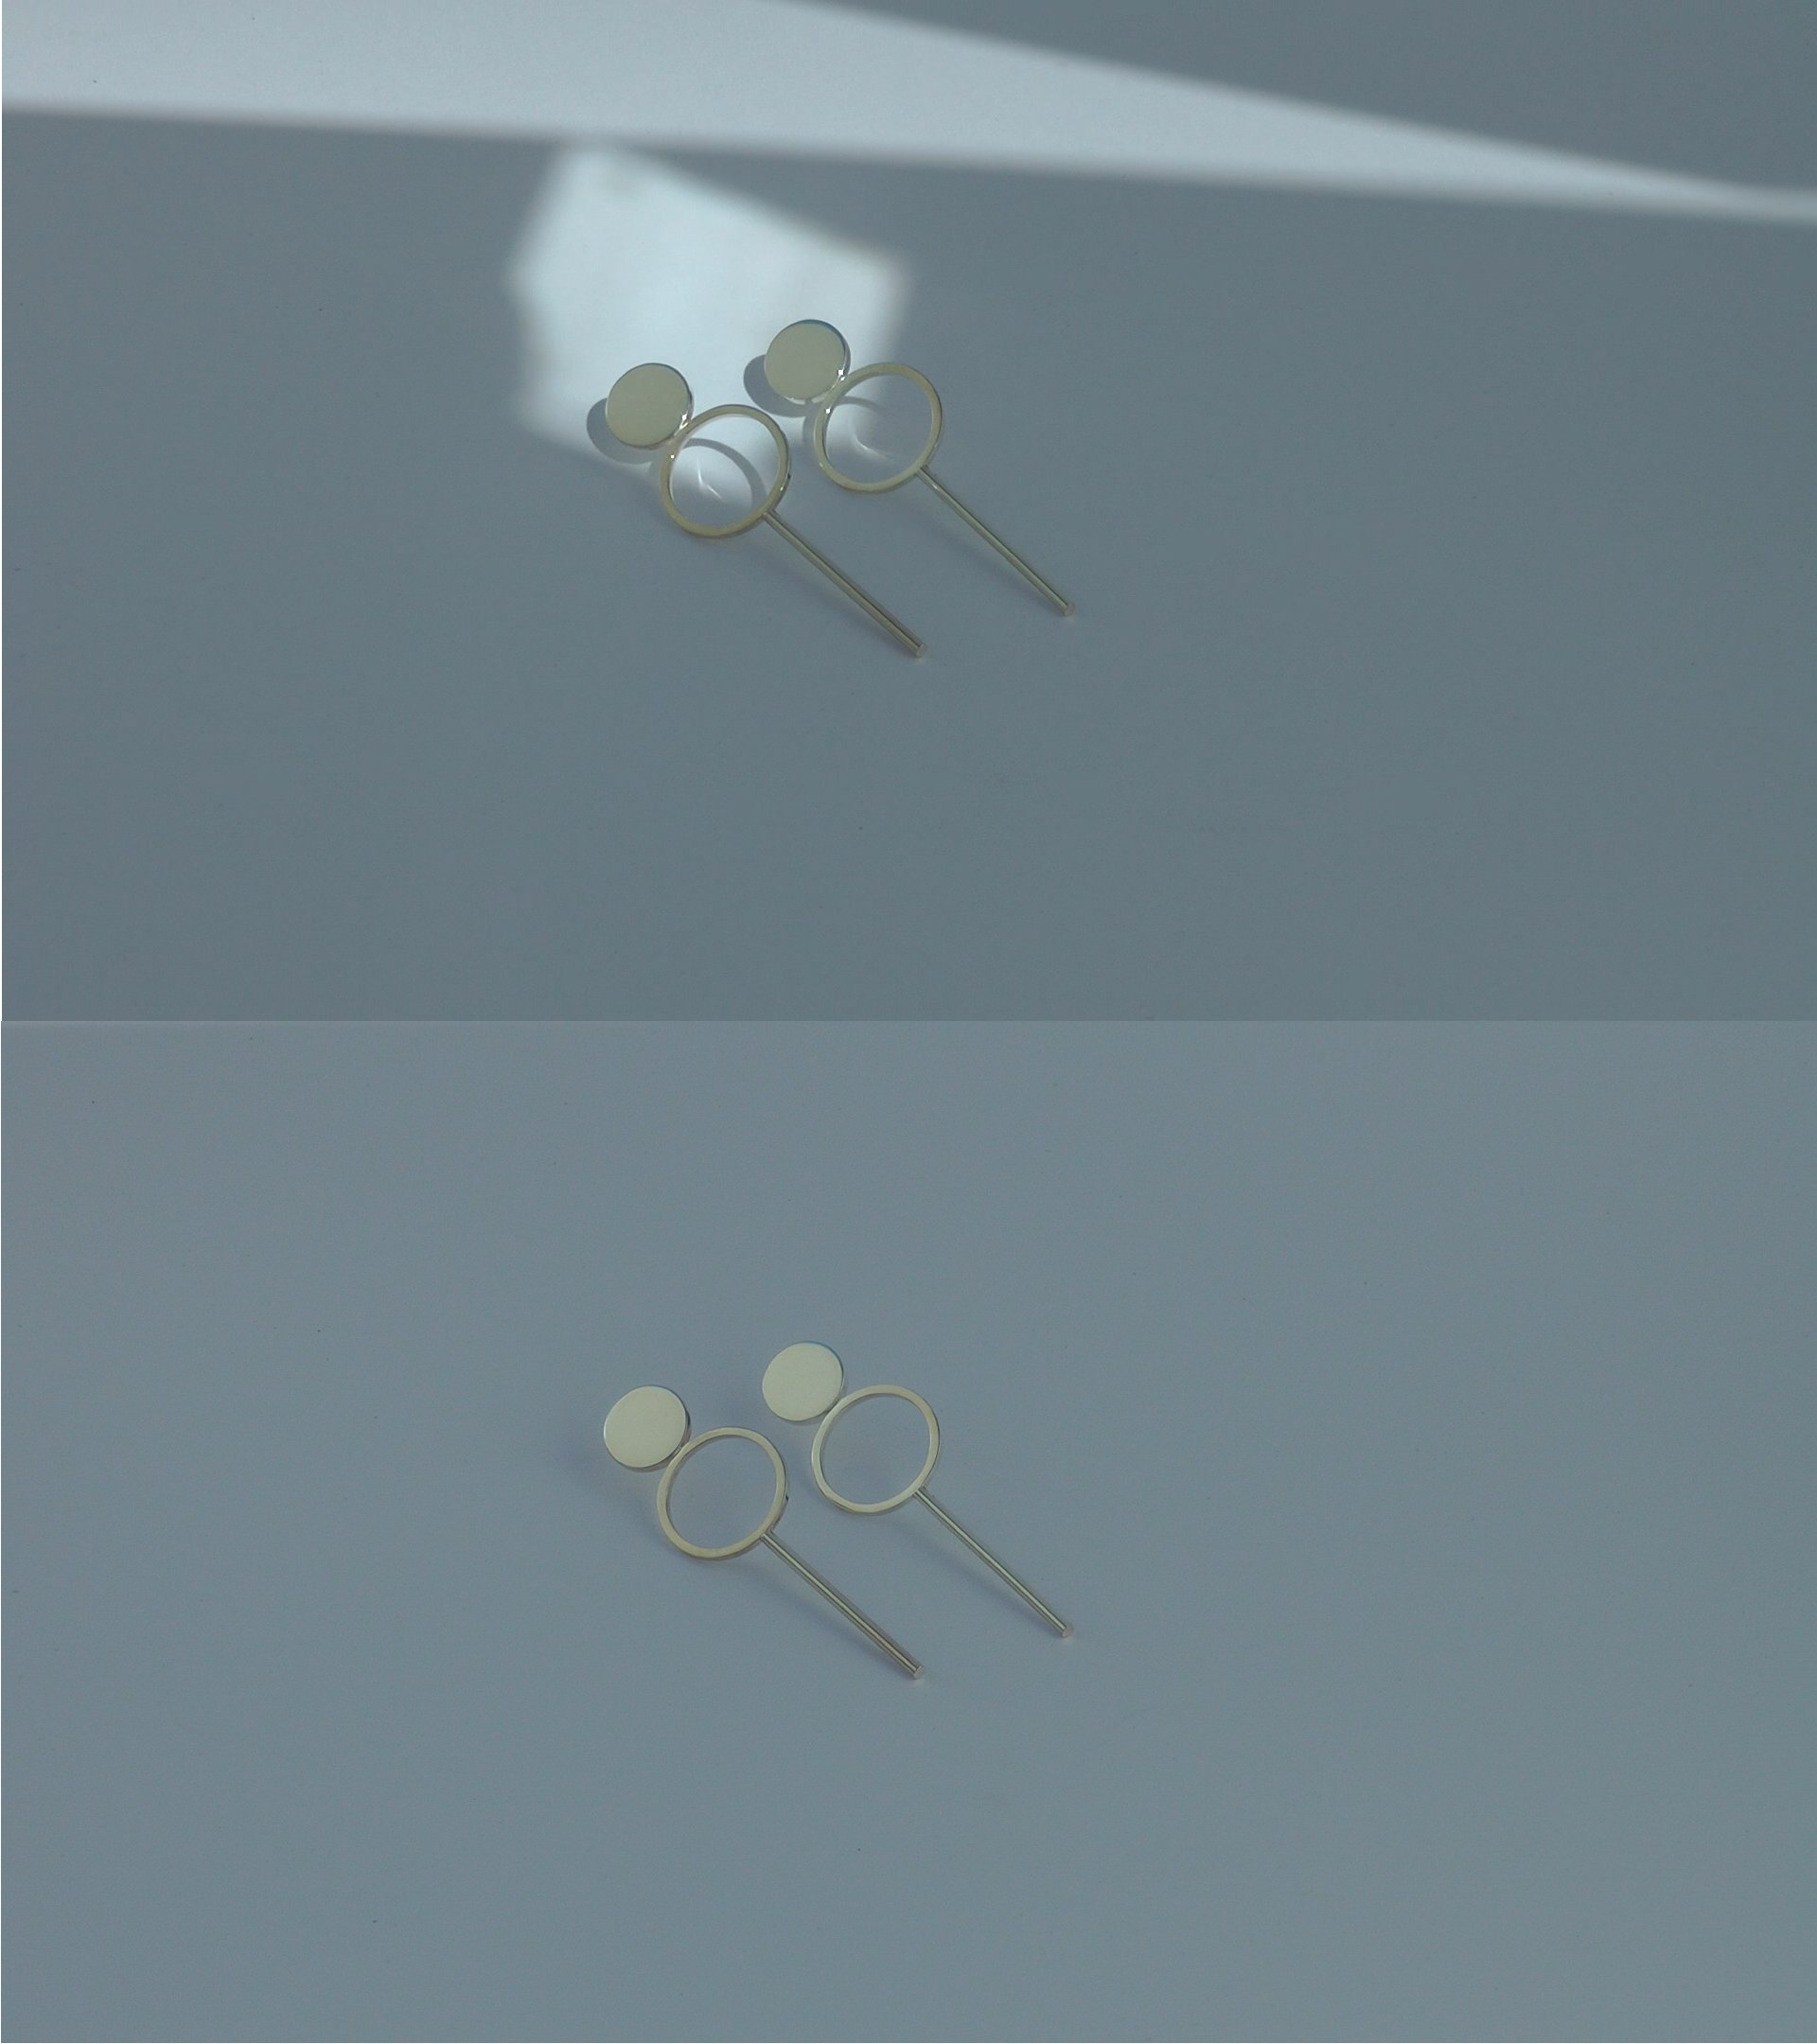 Image of Edition 1. Piece 9. Earrings <font color="#996666"> / ON SALE / WAS $290</font>   